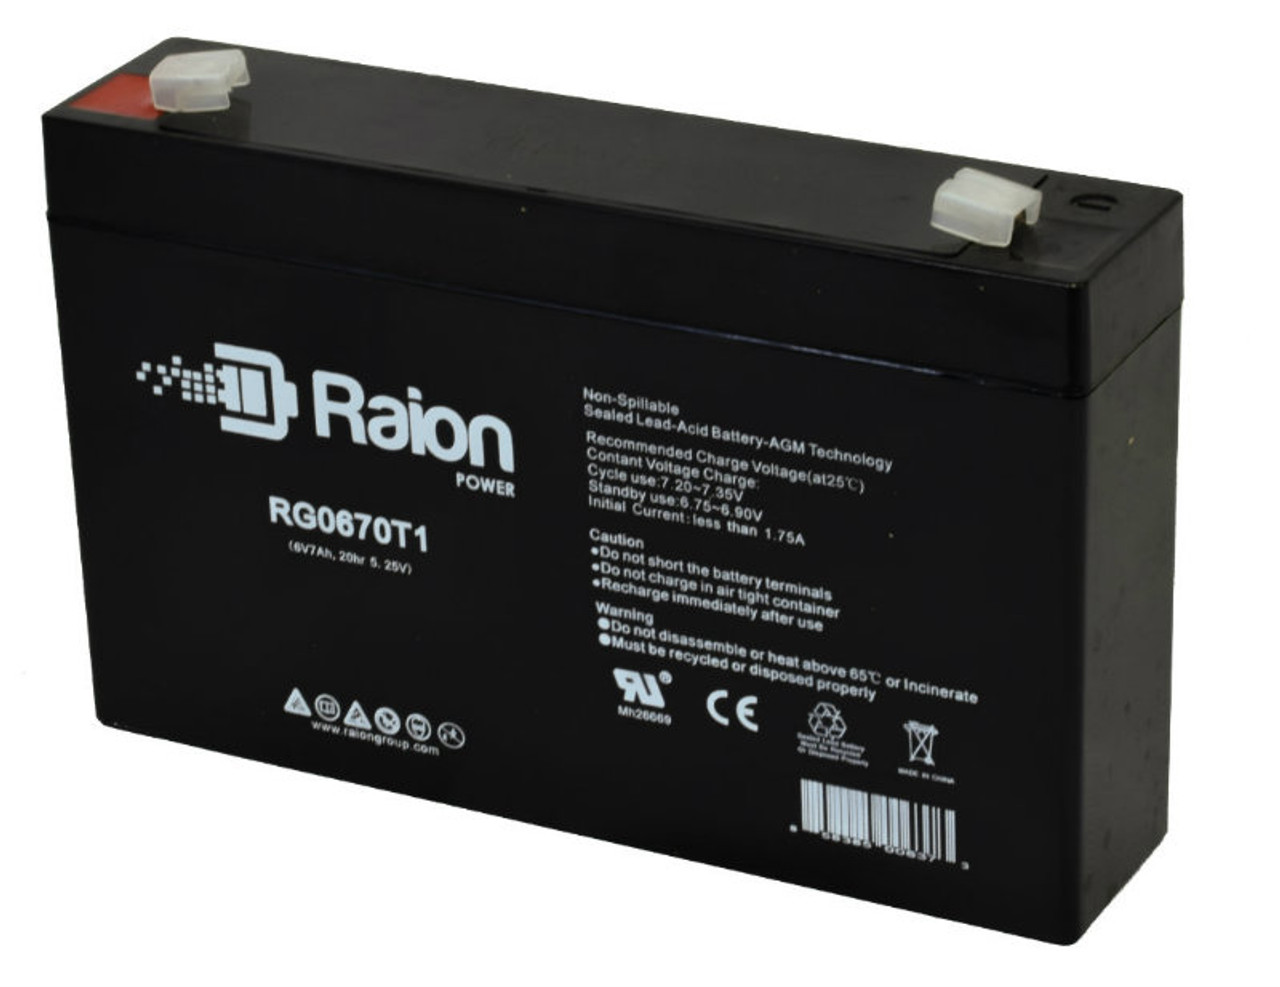 Raion Power RG0670T1 6V 7Ah Replacement Emergency Light Battery for Trio TL930210